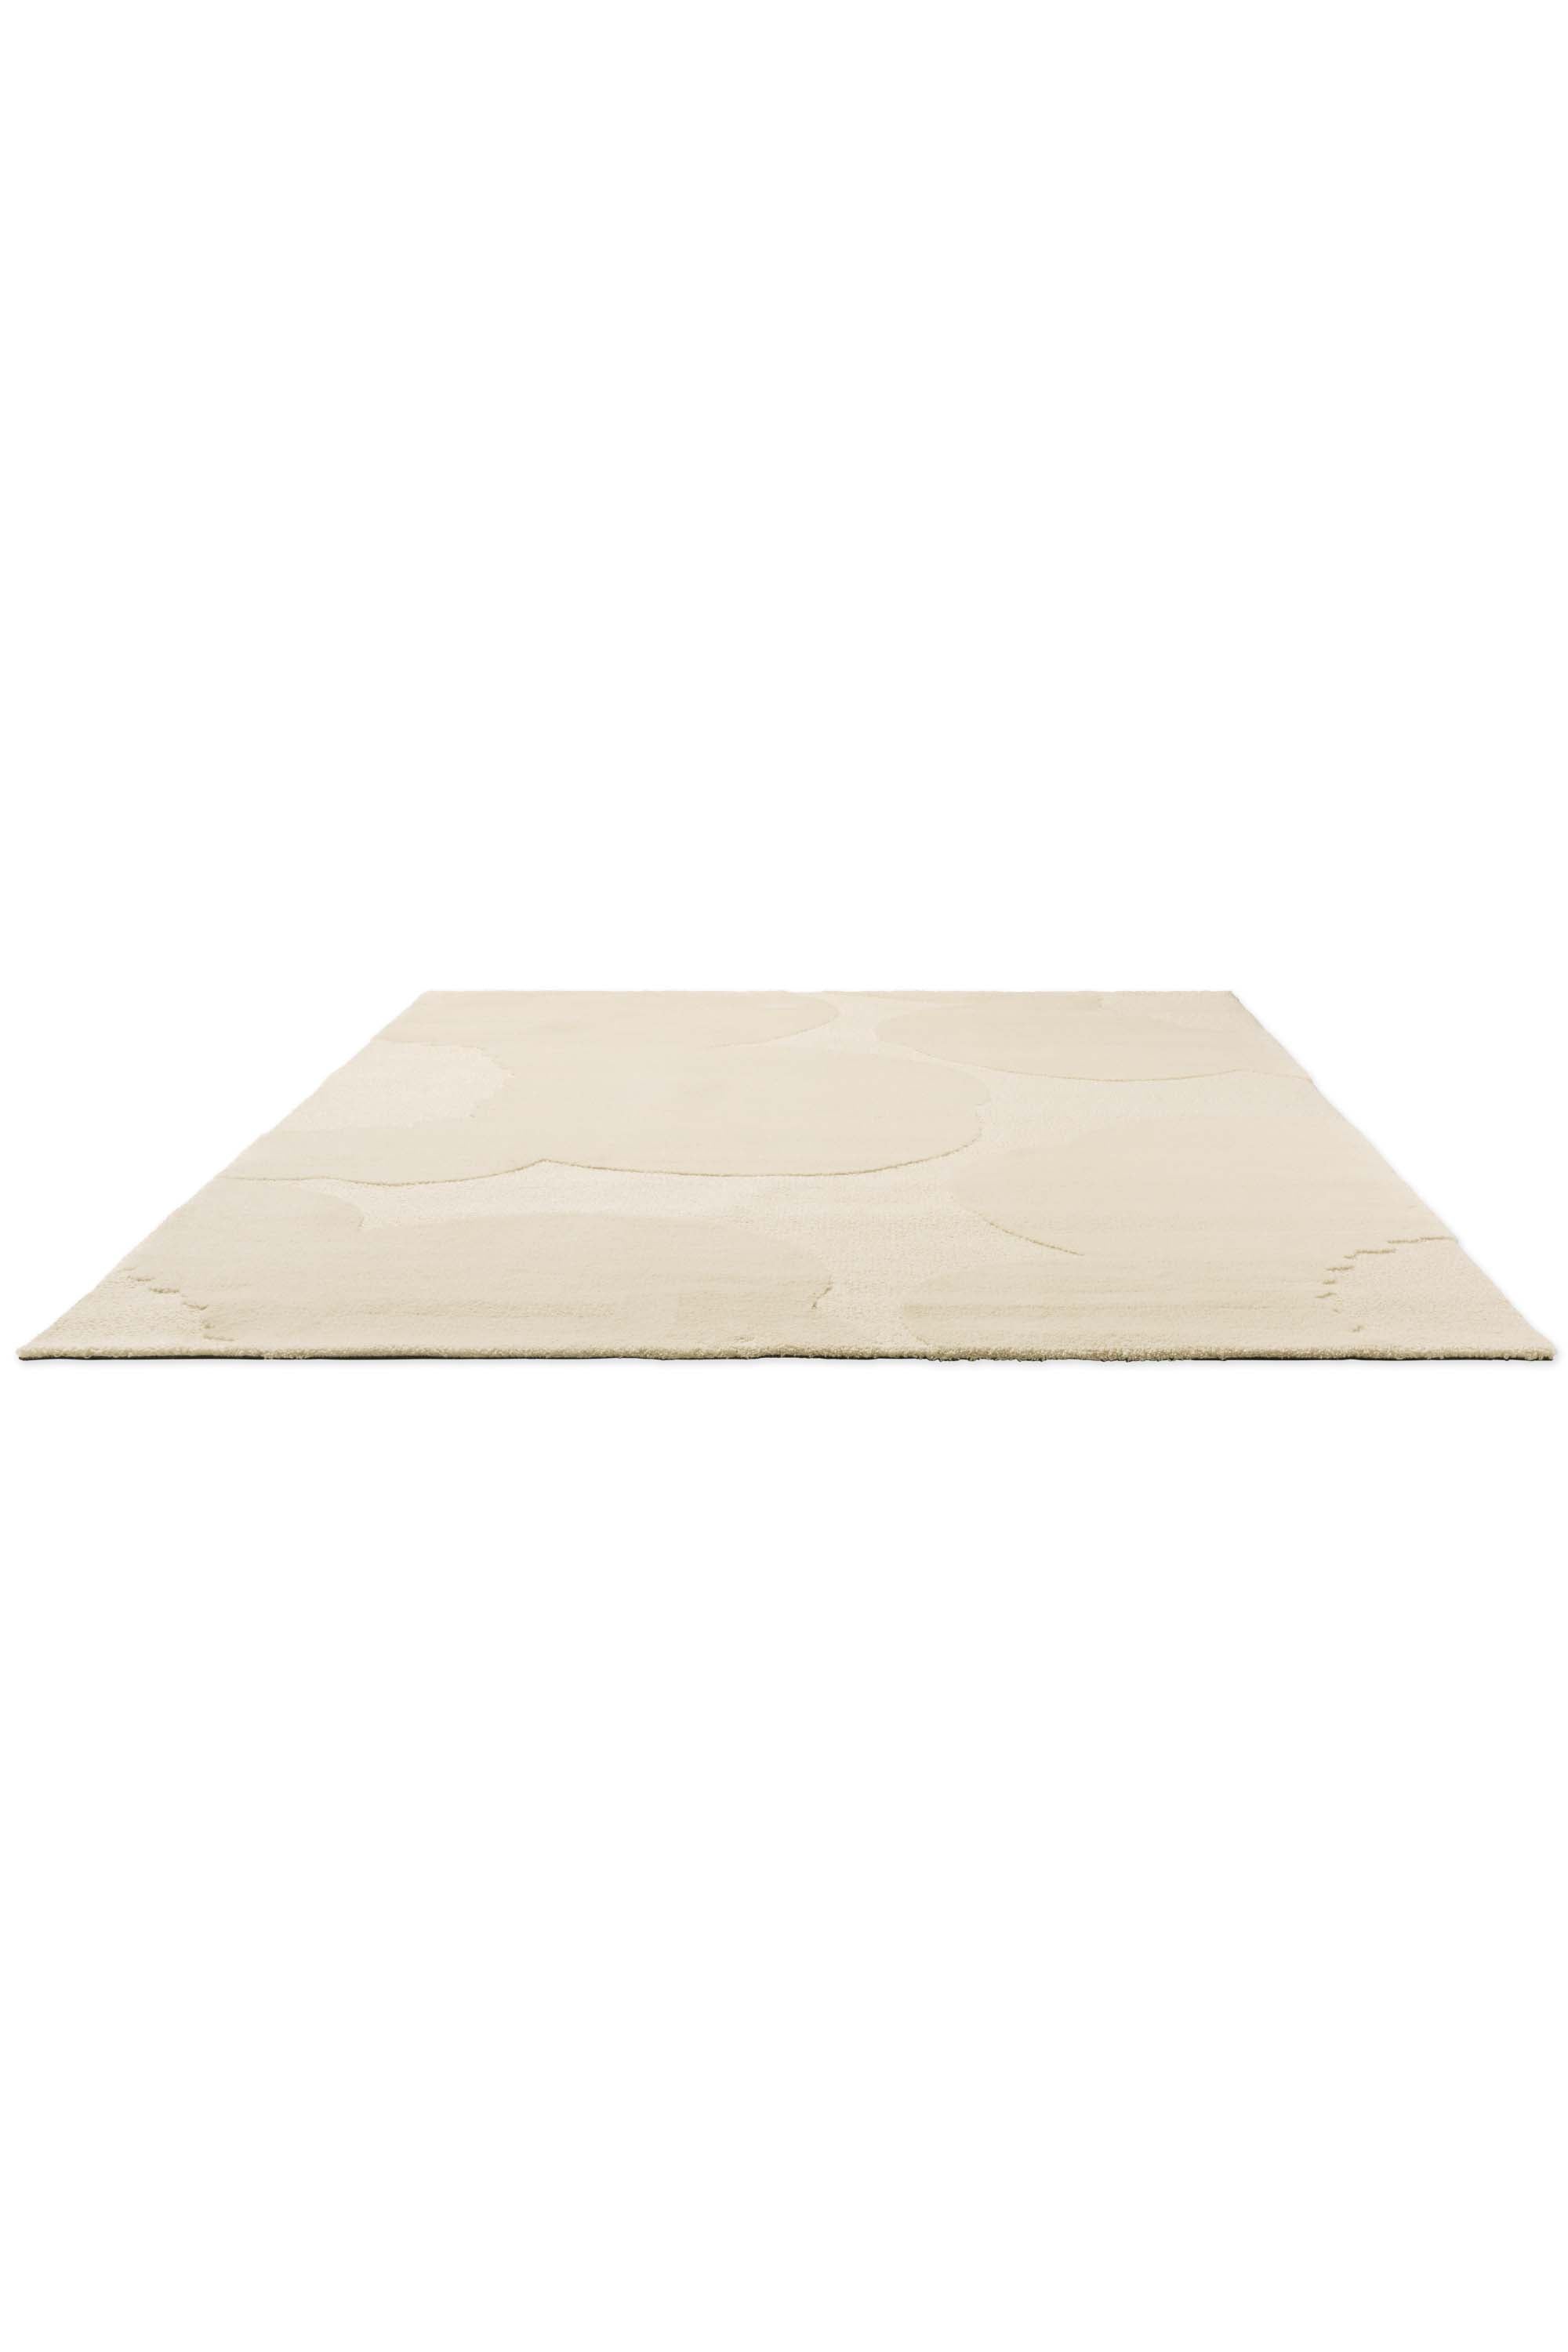 Plain rug with cream floral pattern 